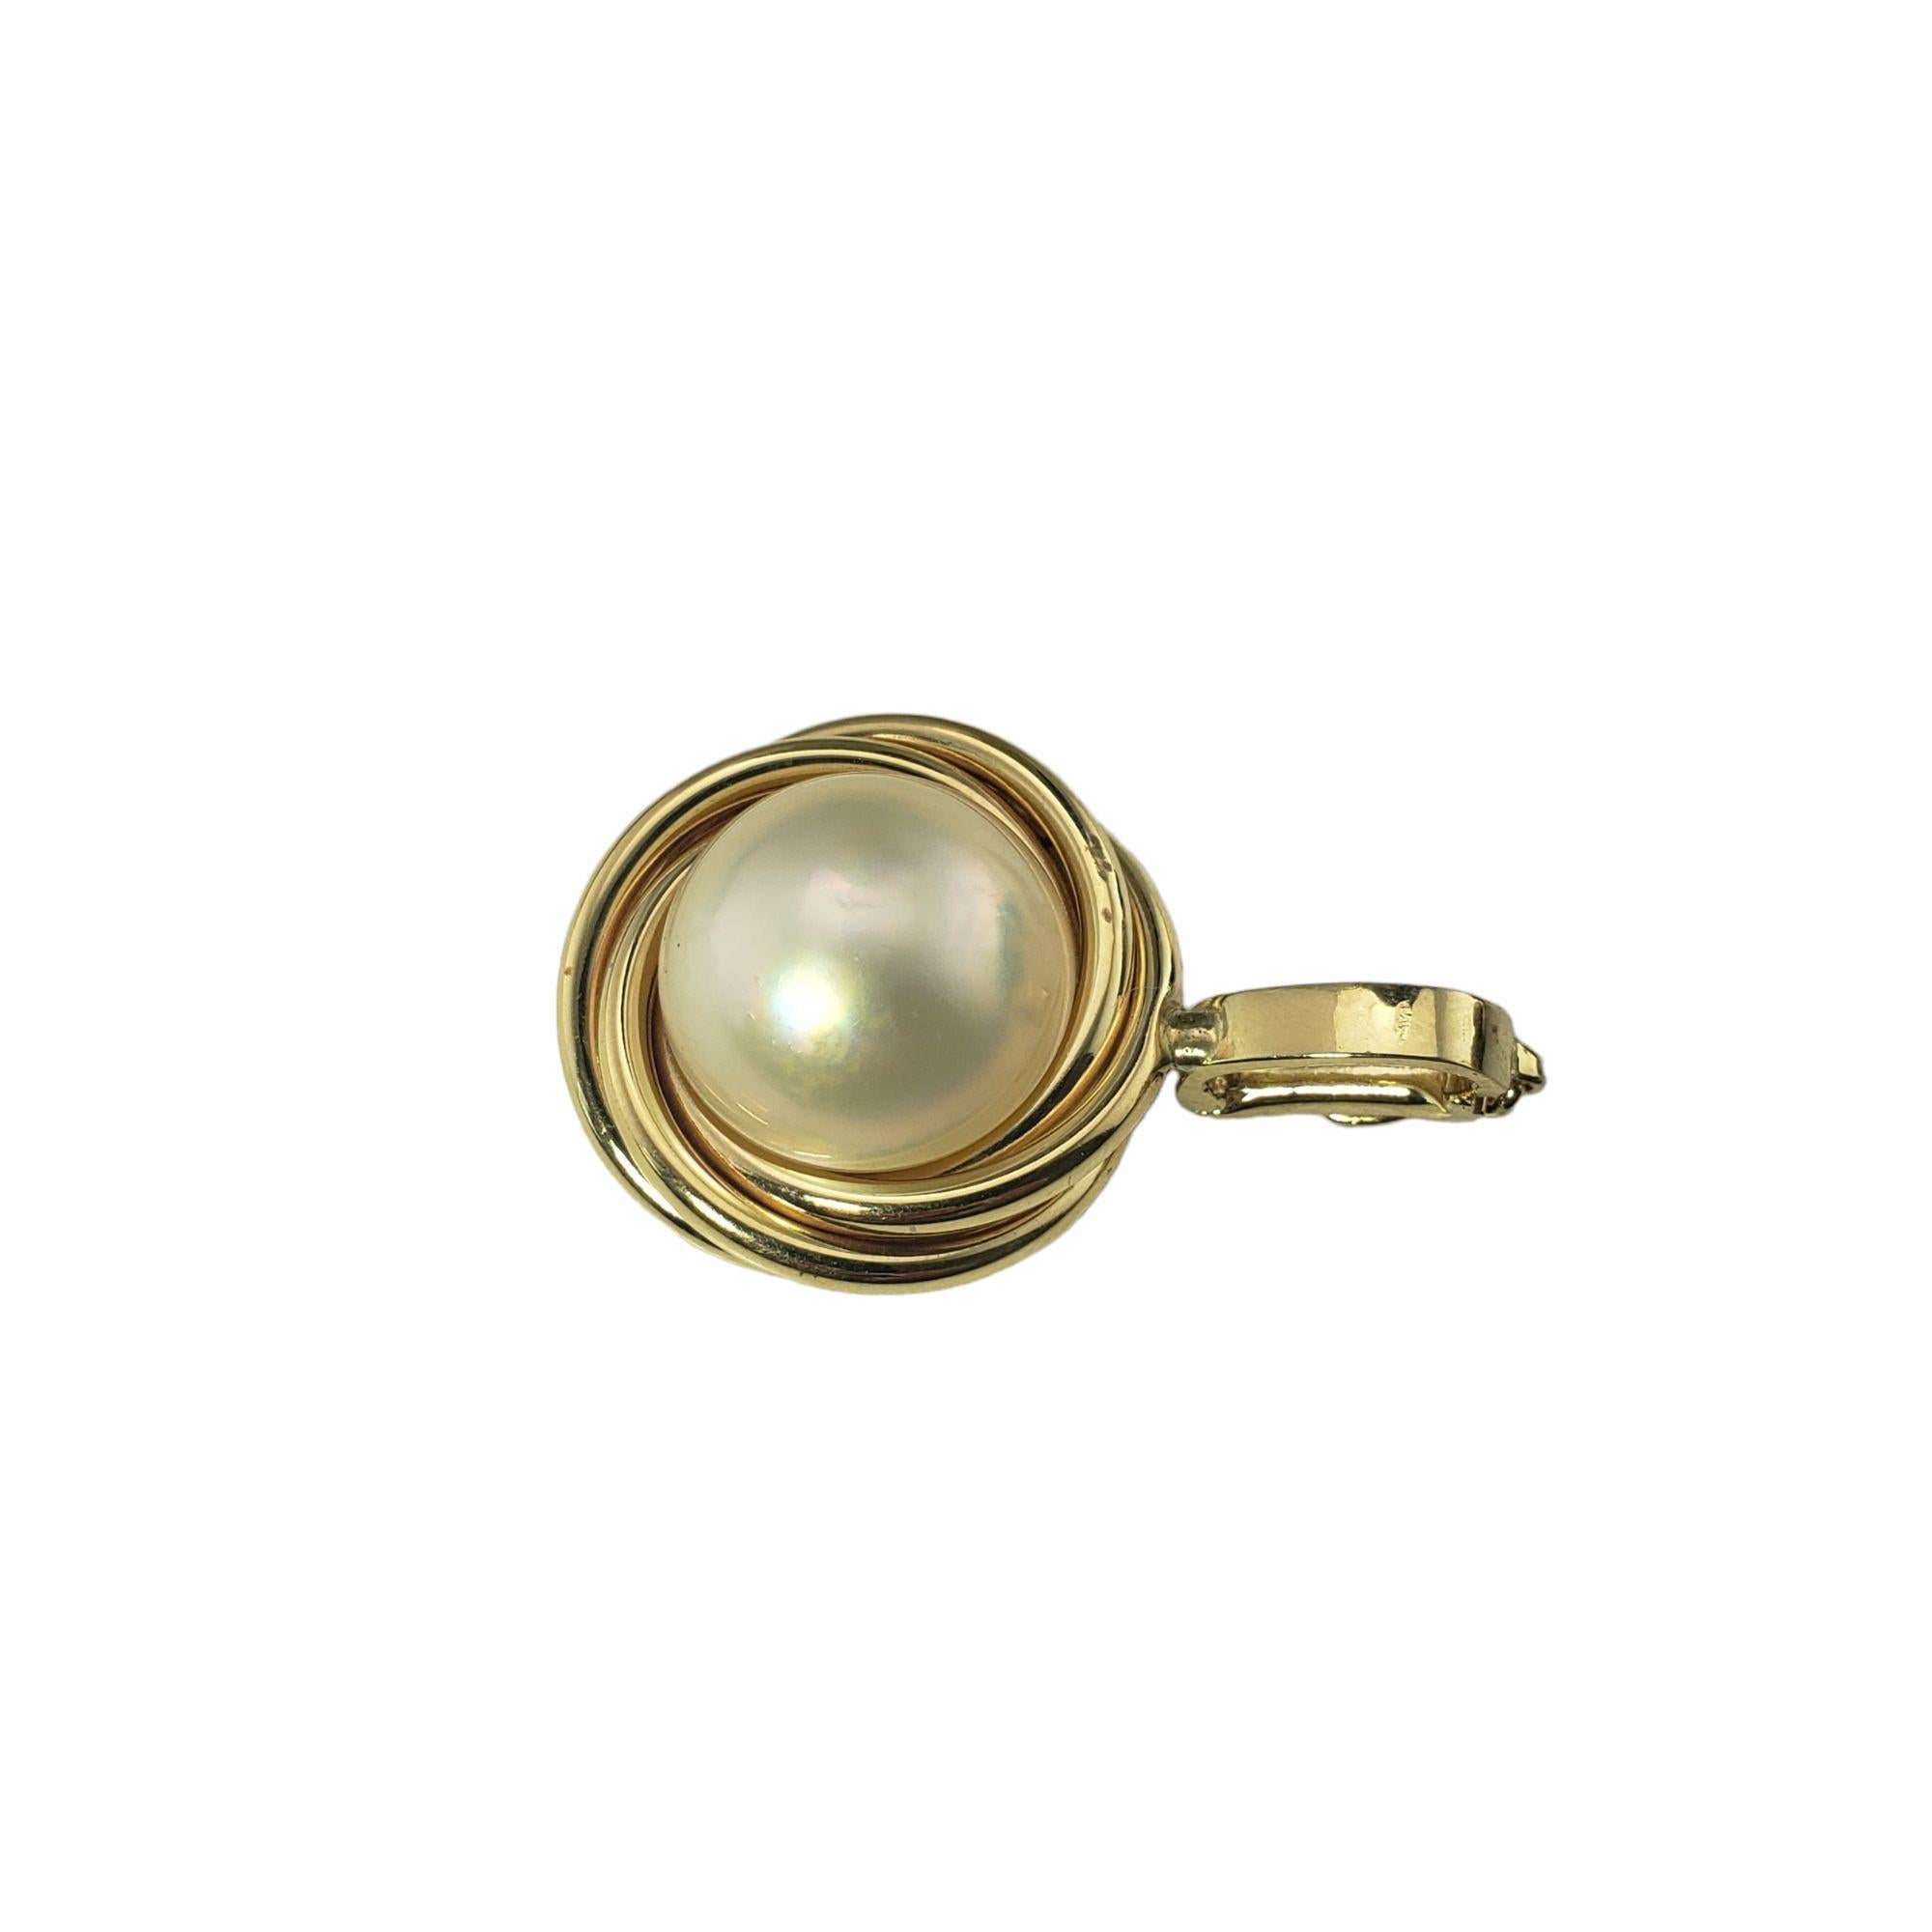 Vintage 14 Karat Yellow Gold and Mabe Pearl Pendant-

This lovely pendant features one Mabe pearl (15 mm) set in beautifully detailed 14K yellow gold.

Matching earrings: RL-00012966

Size: 35 mm x 22 mm

Weight: 4.1 dwt. / 6.4 gr.

Tested for 14K